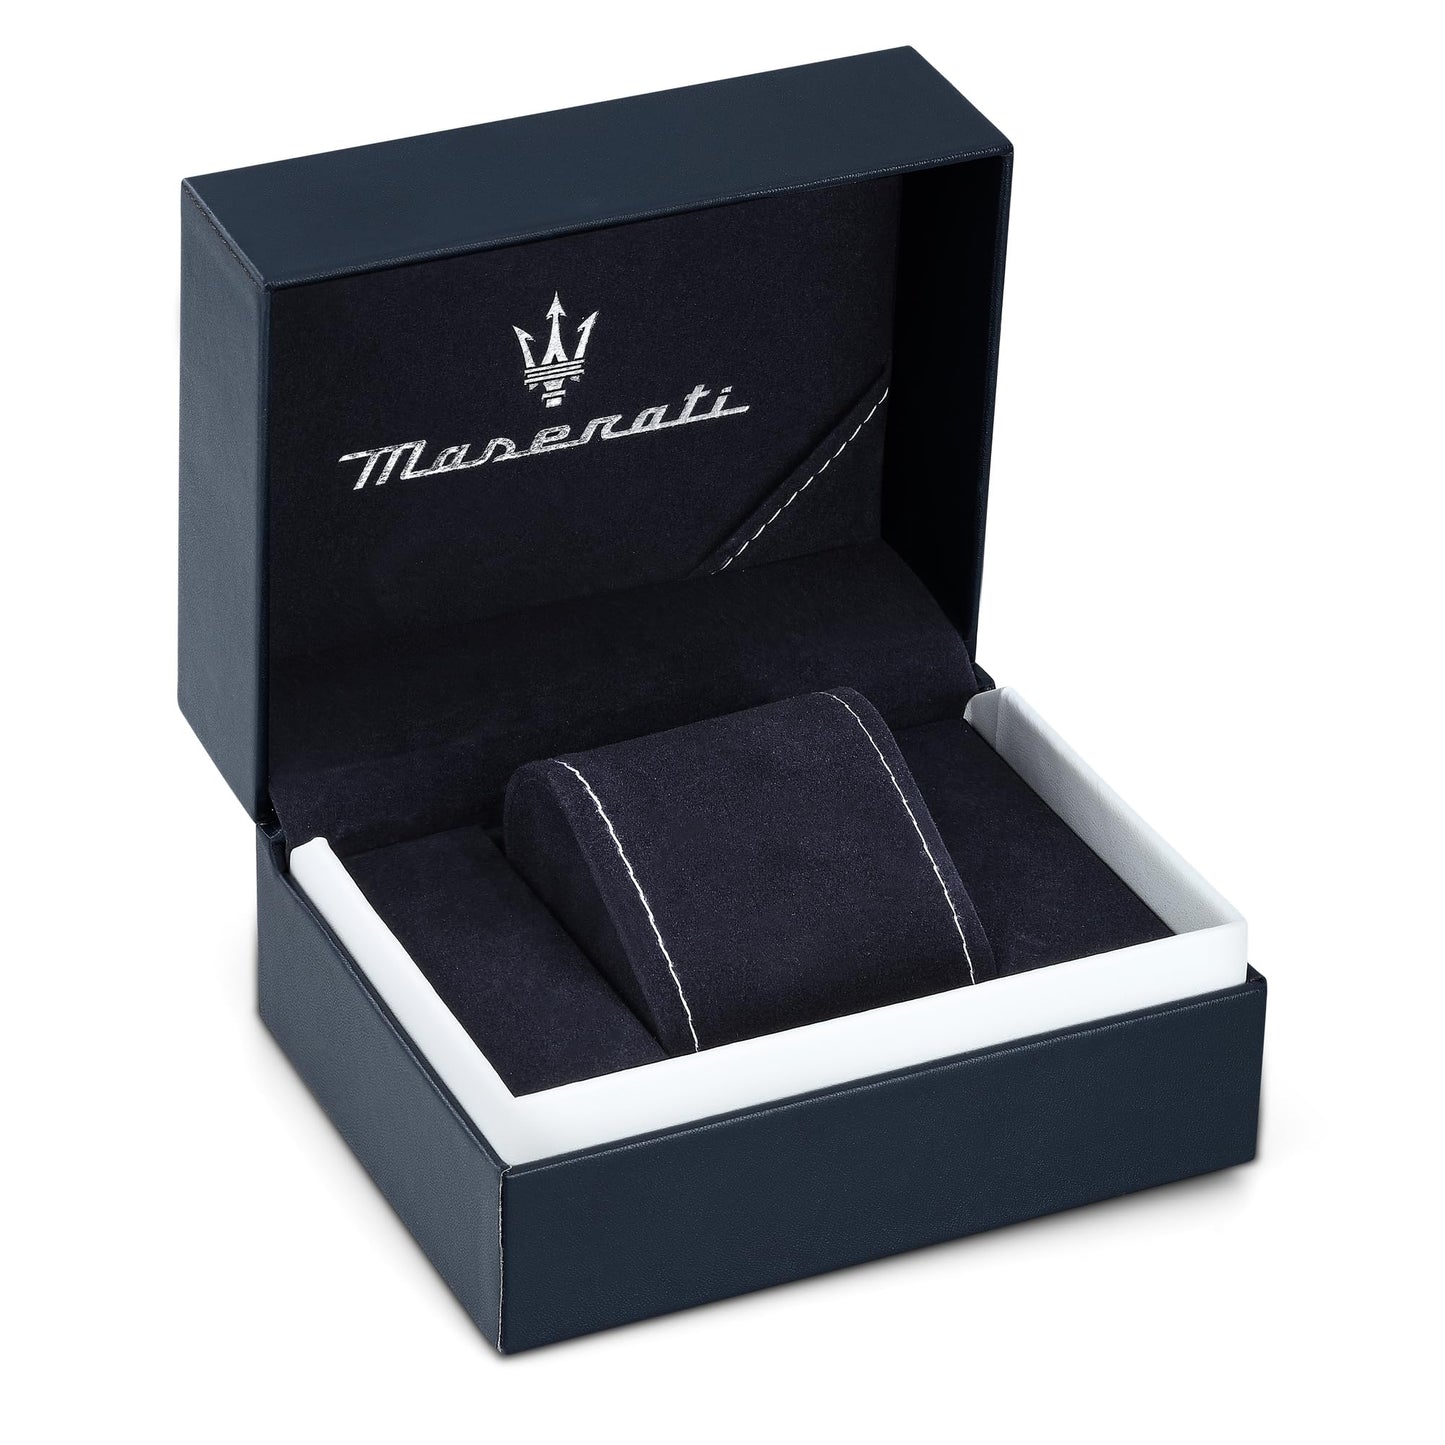 Maserati Lifestyle Chronograph Small Seconds Analog Dial Color Blue Men's Watch - R8873618032